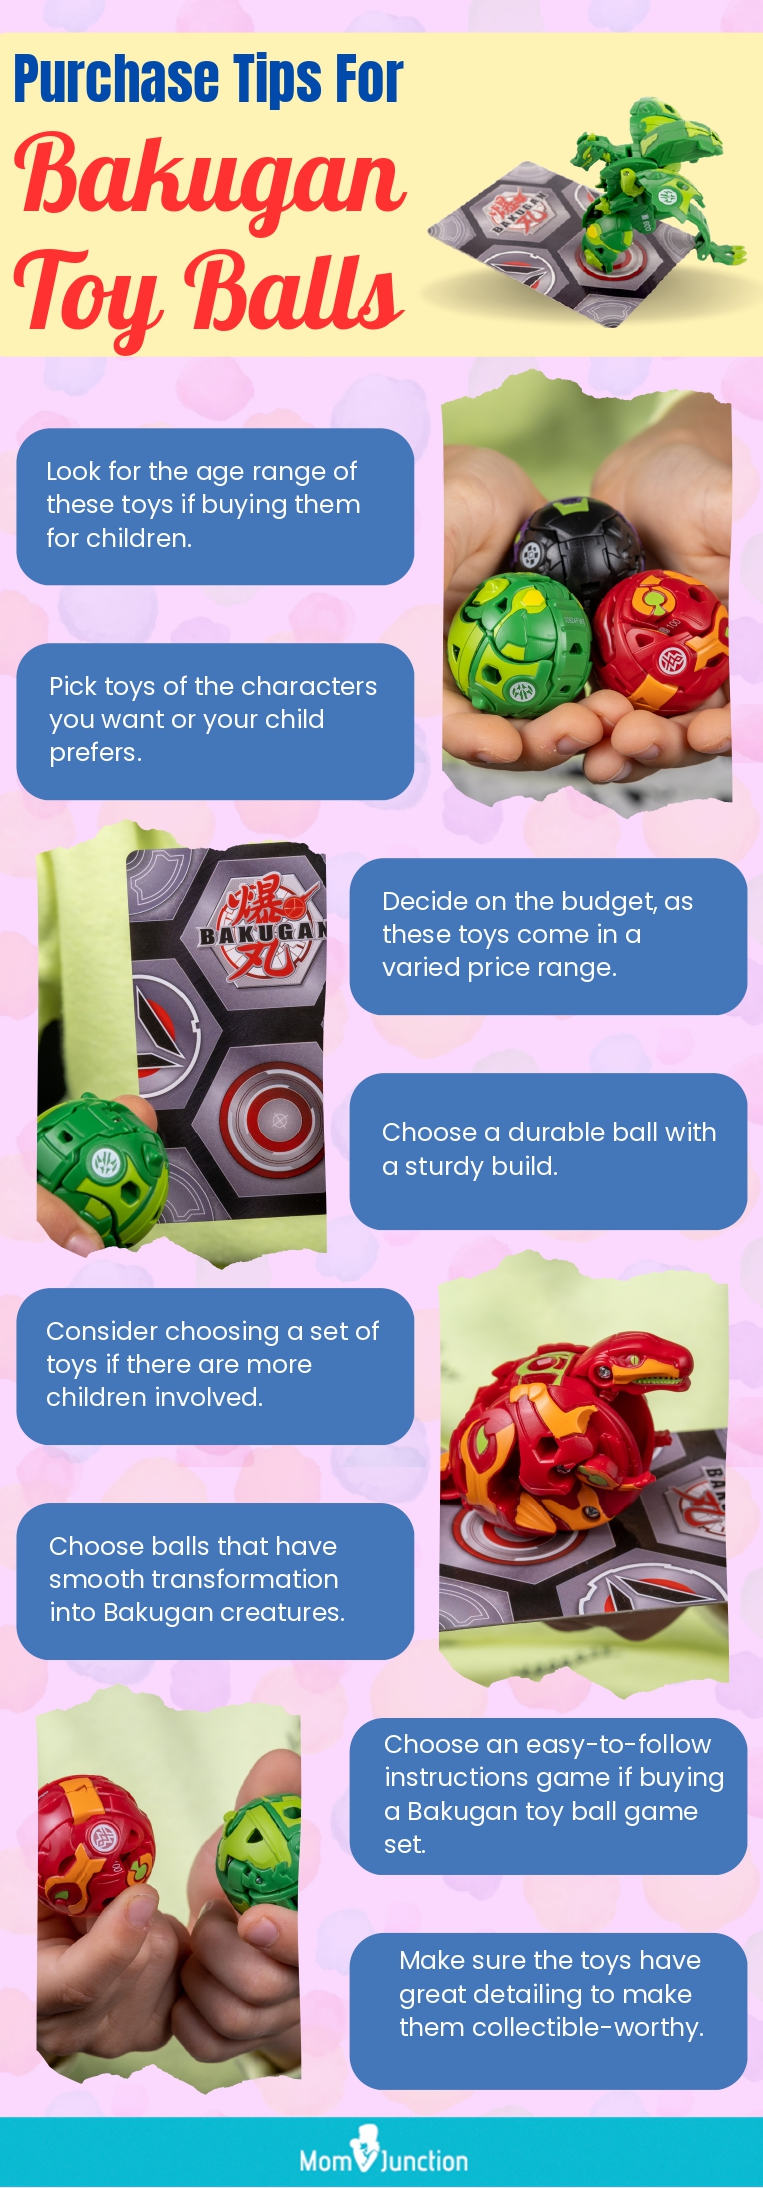 Purchase Tips For Bakugan Toy Balls (infographic)